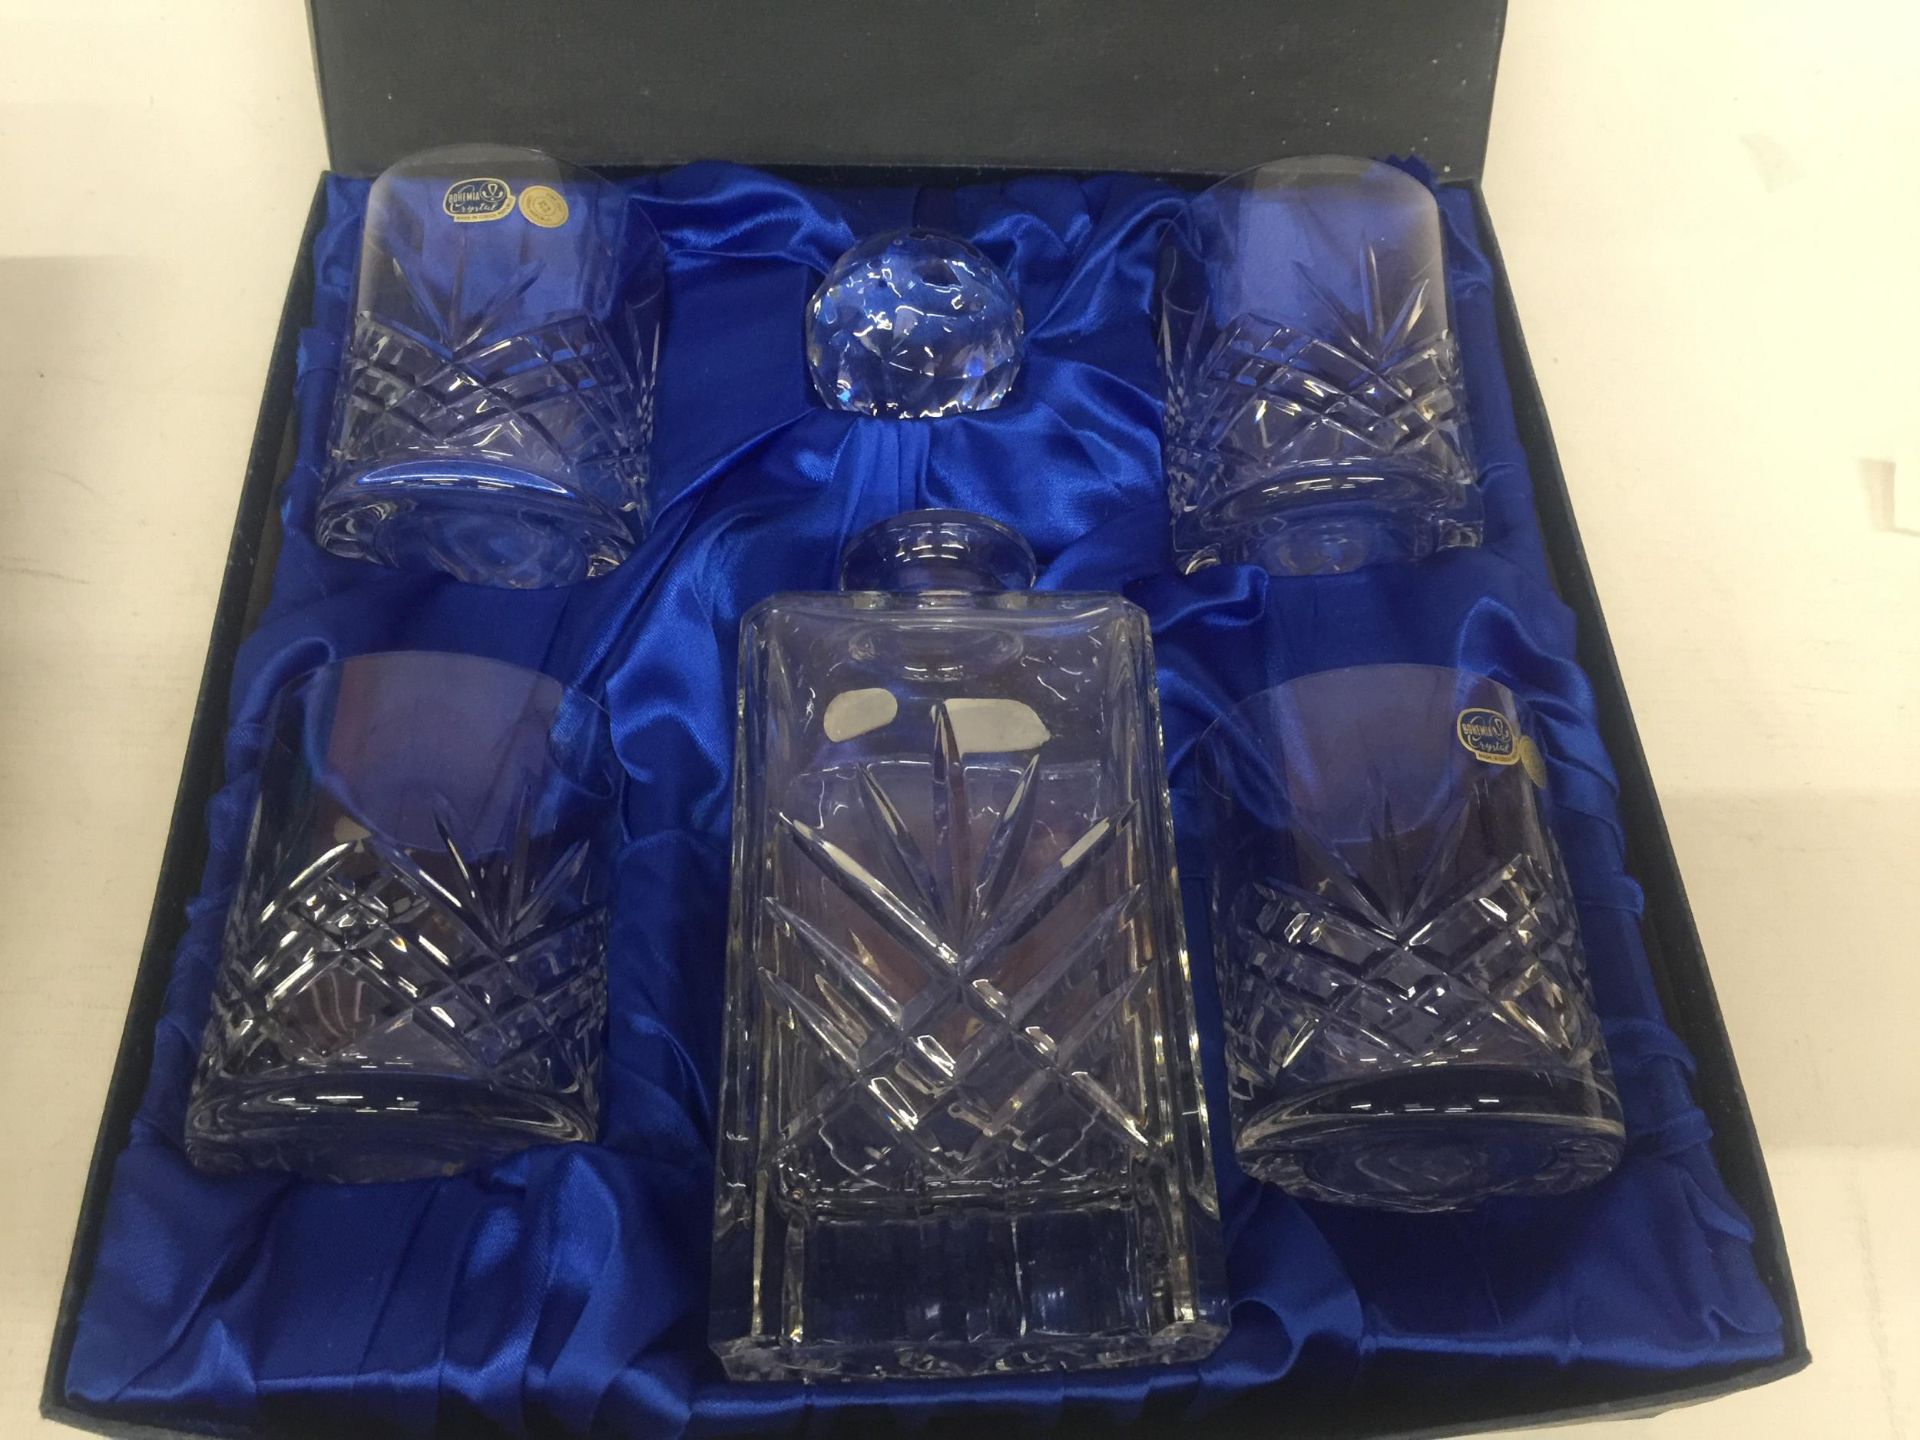 A BOHEMIA CRYSTAL DECANTER WITH FOUR WHISKY TUMBLERS IN A PRESENTATION BOX - Image 2 of 3